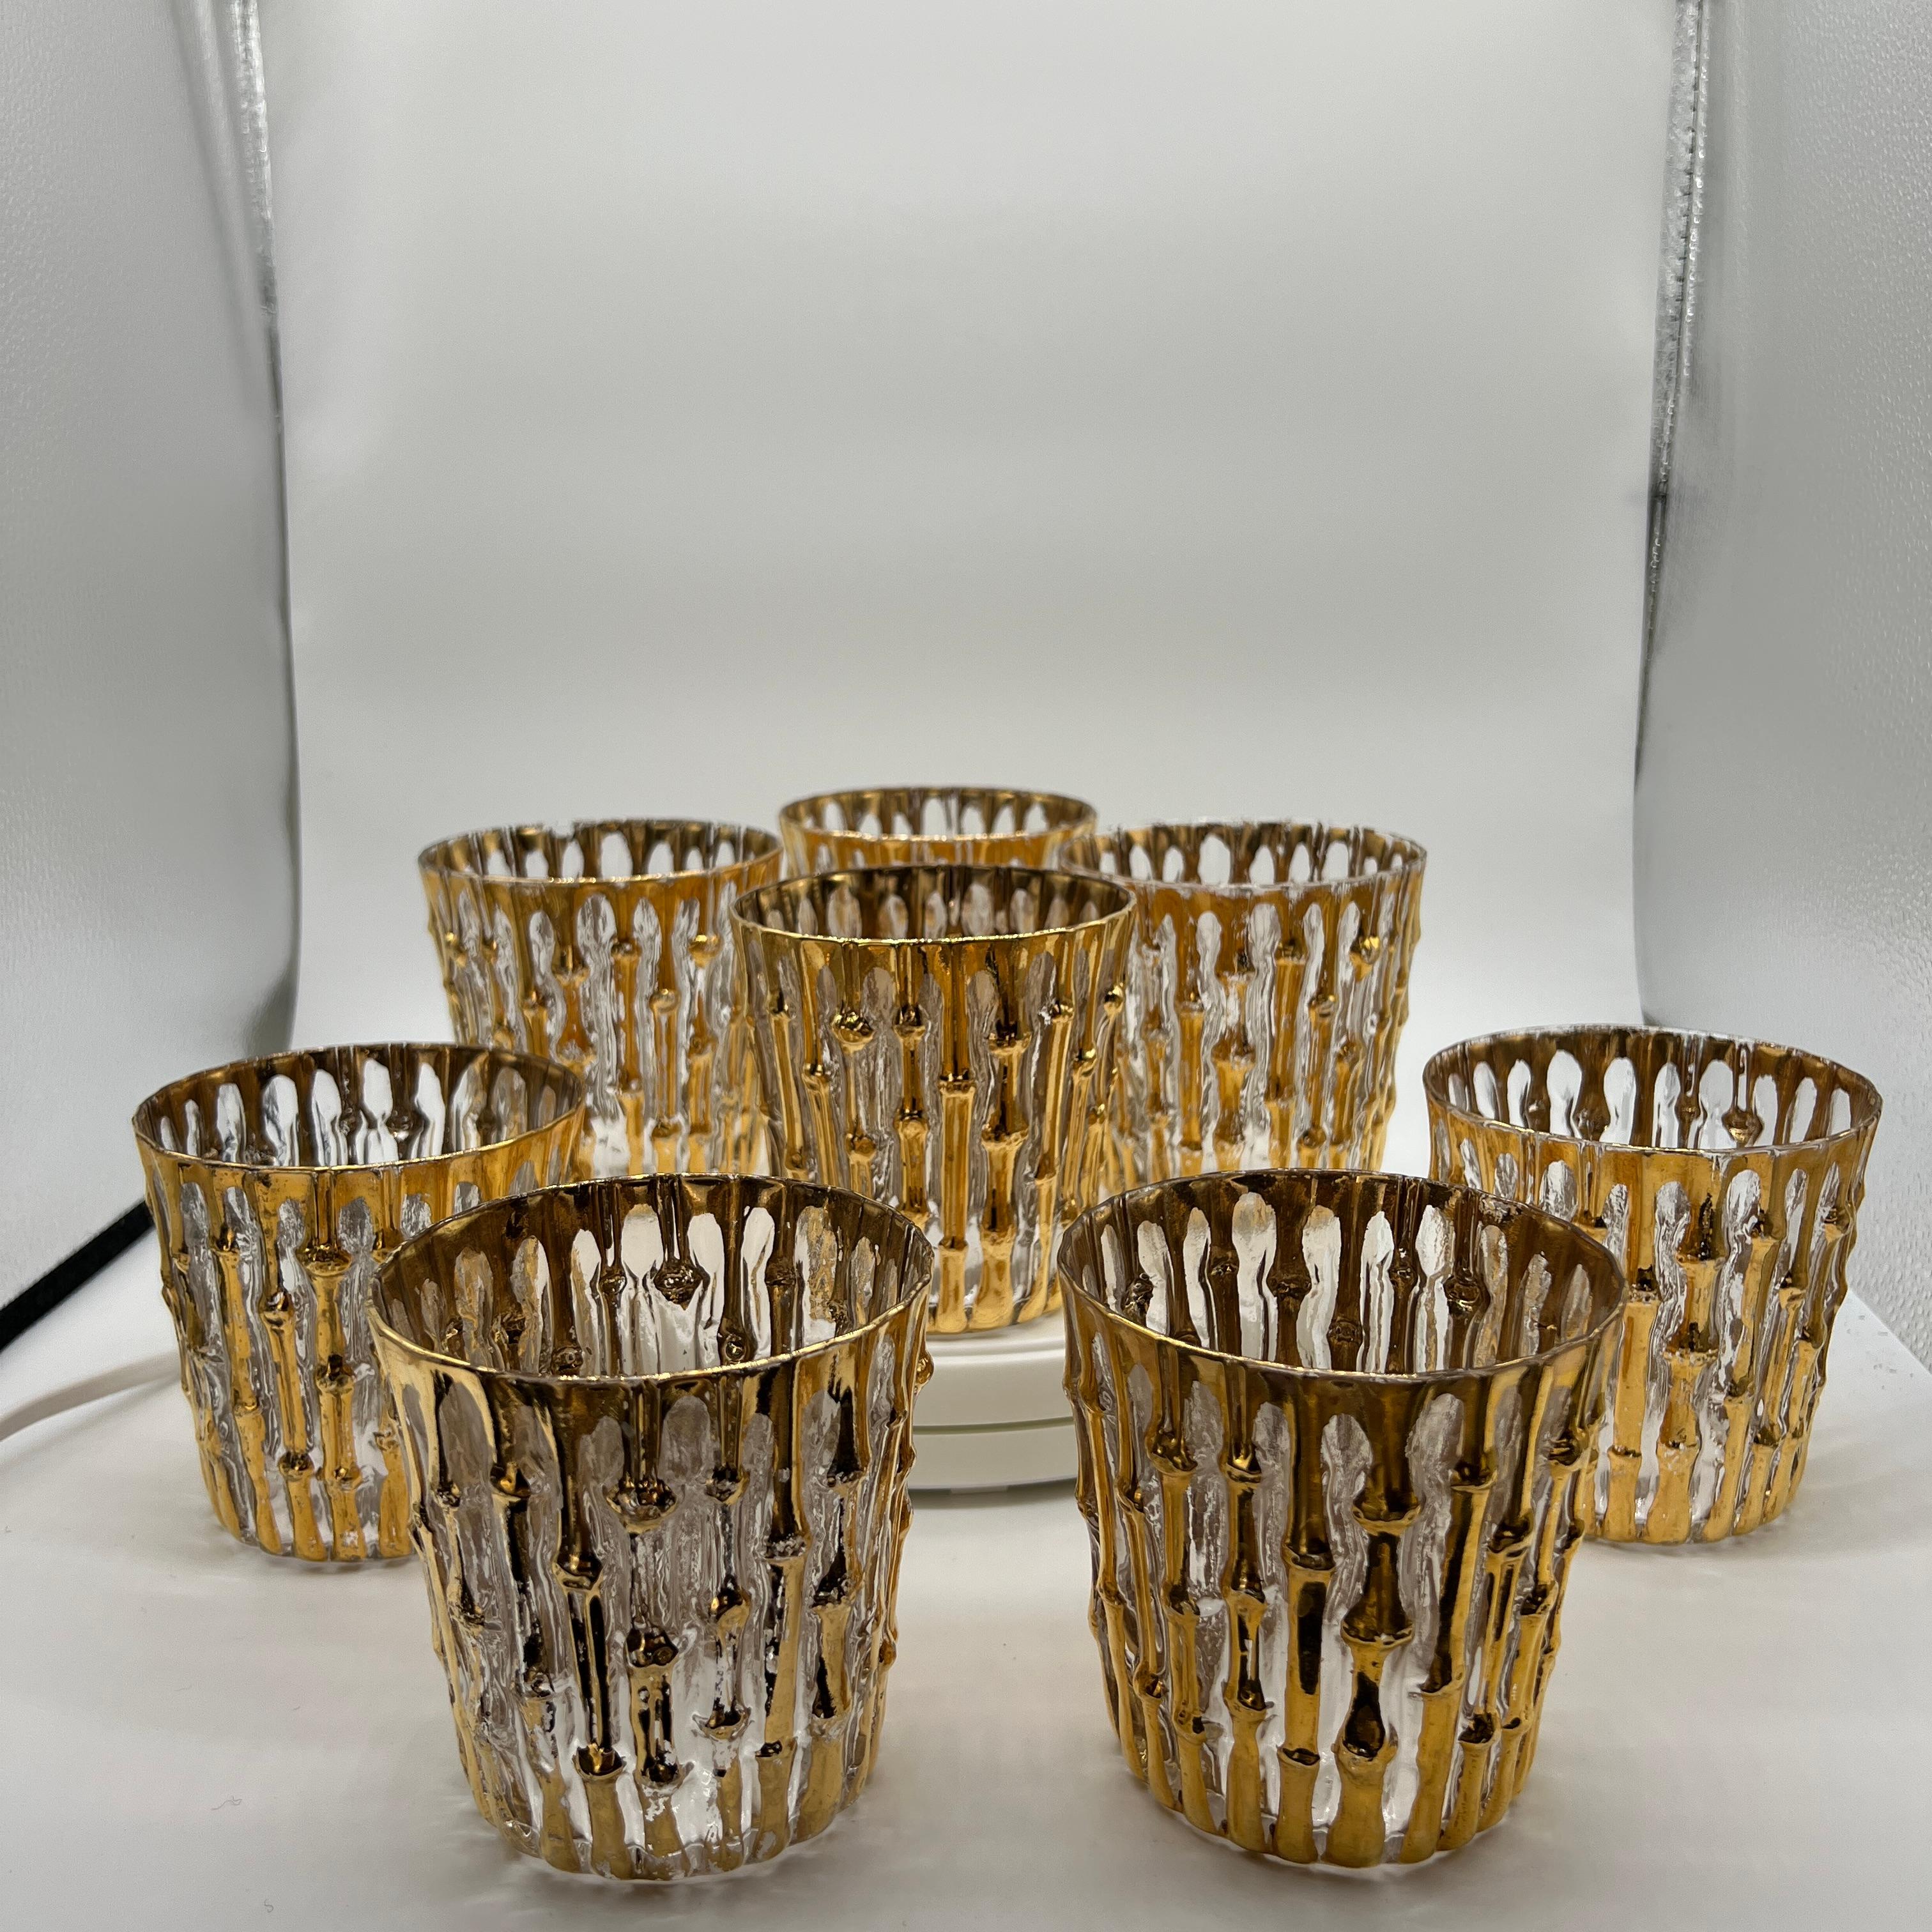 Rare set of 8 rocks glasses from Imperial Glass (Bellaire, OH). They are in very good condition with minimal loss close to the rim on a few glasses (see close up images). 22-karat gold hand painted bamboo pattern over an embossed texture (feels like